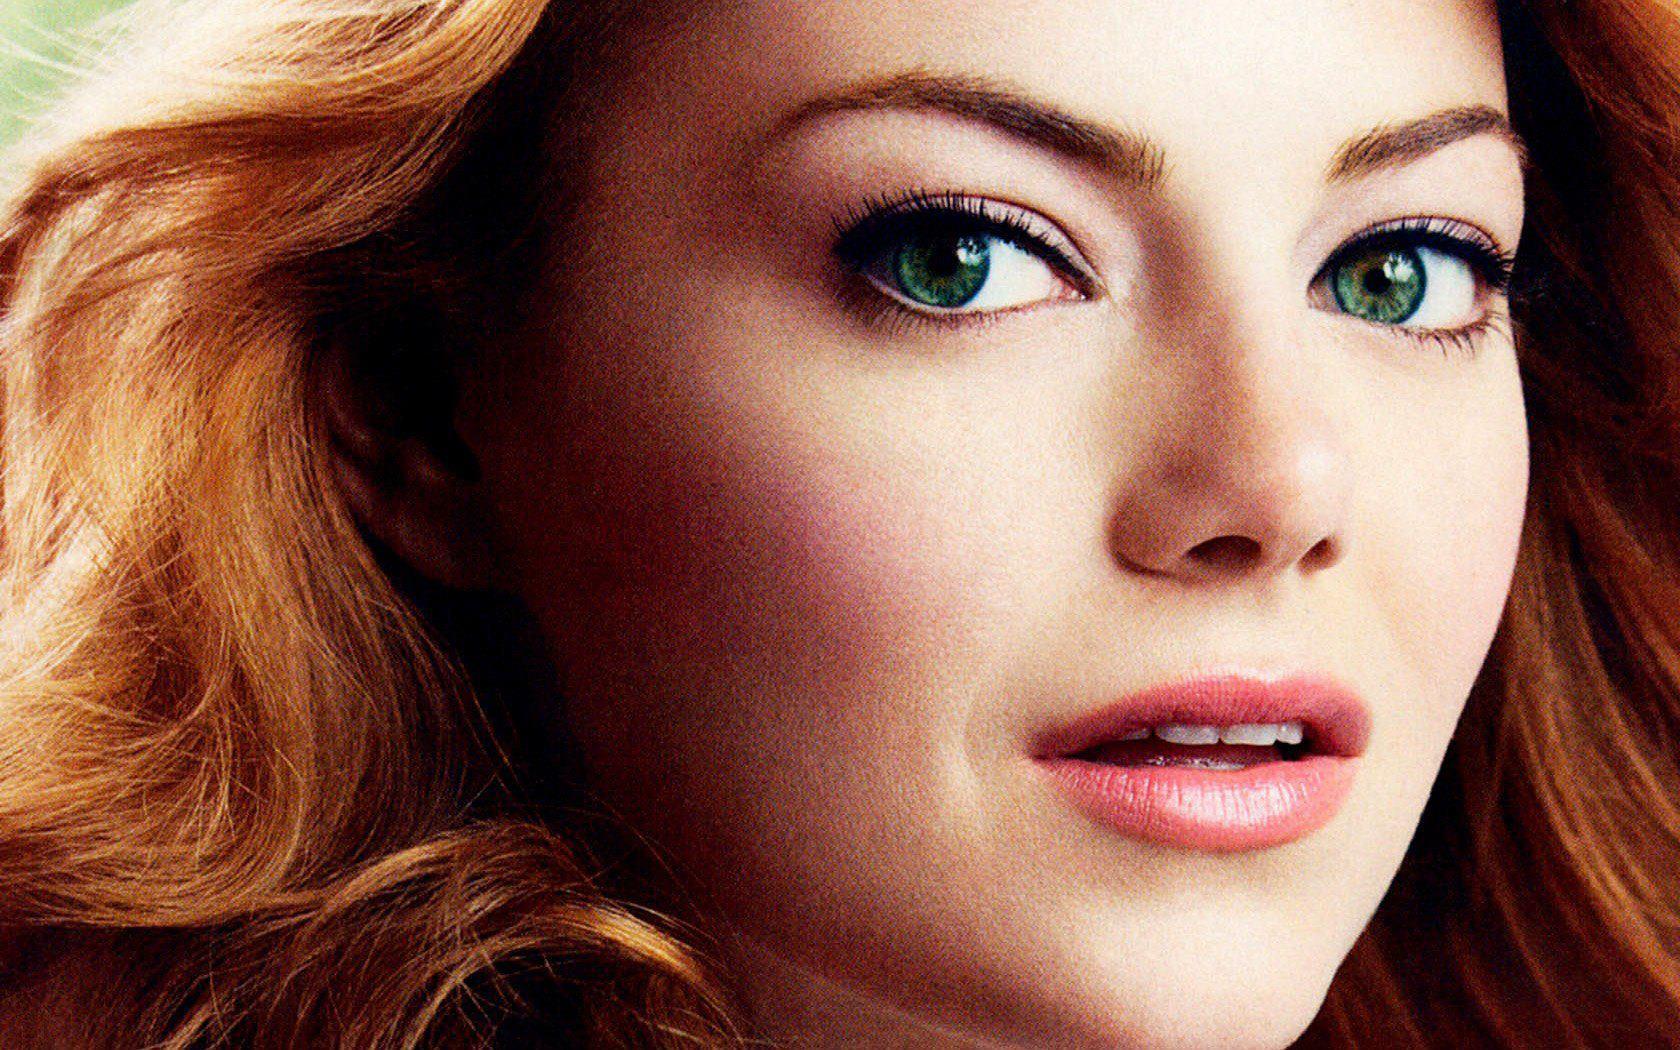 Emma Stone Hair Color. High Definition Wallpaper, High Definition